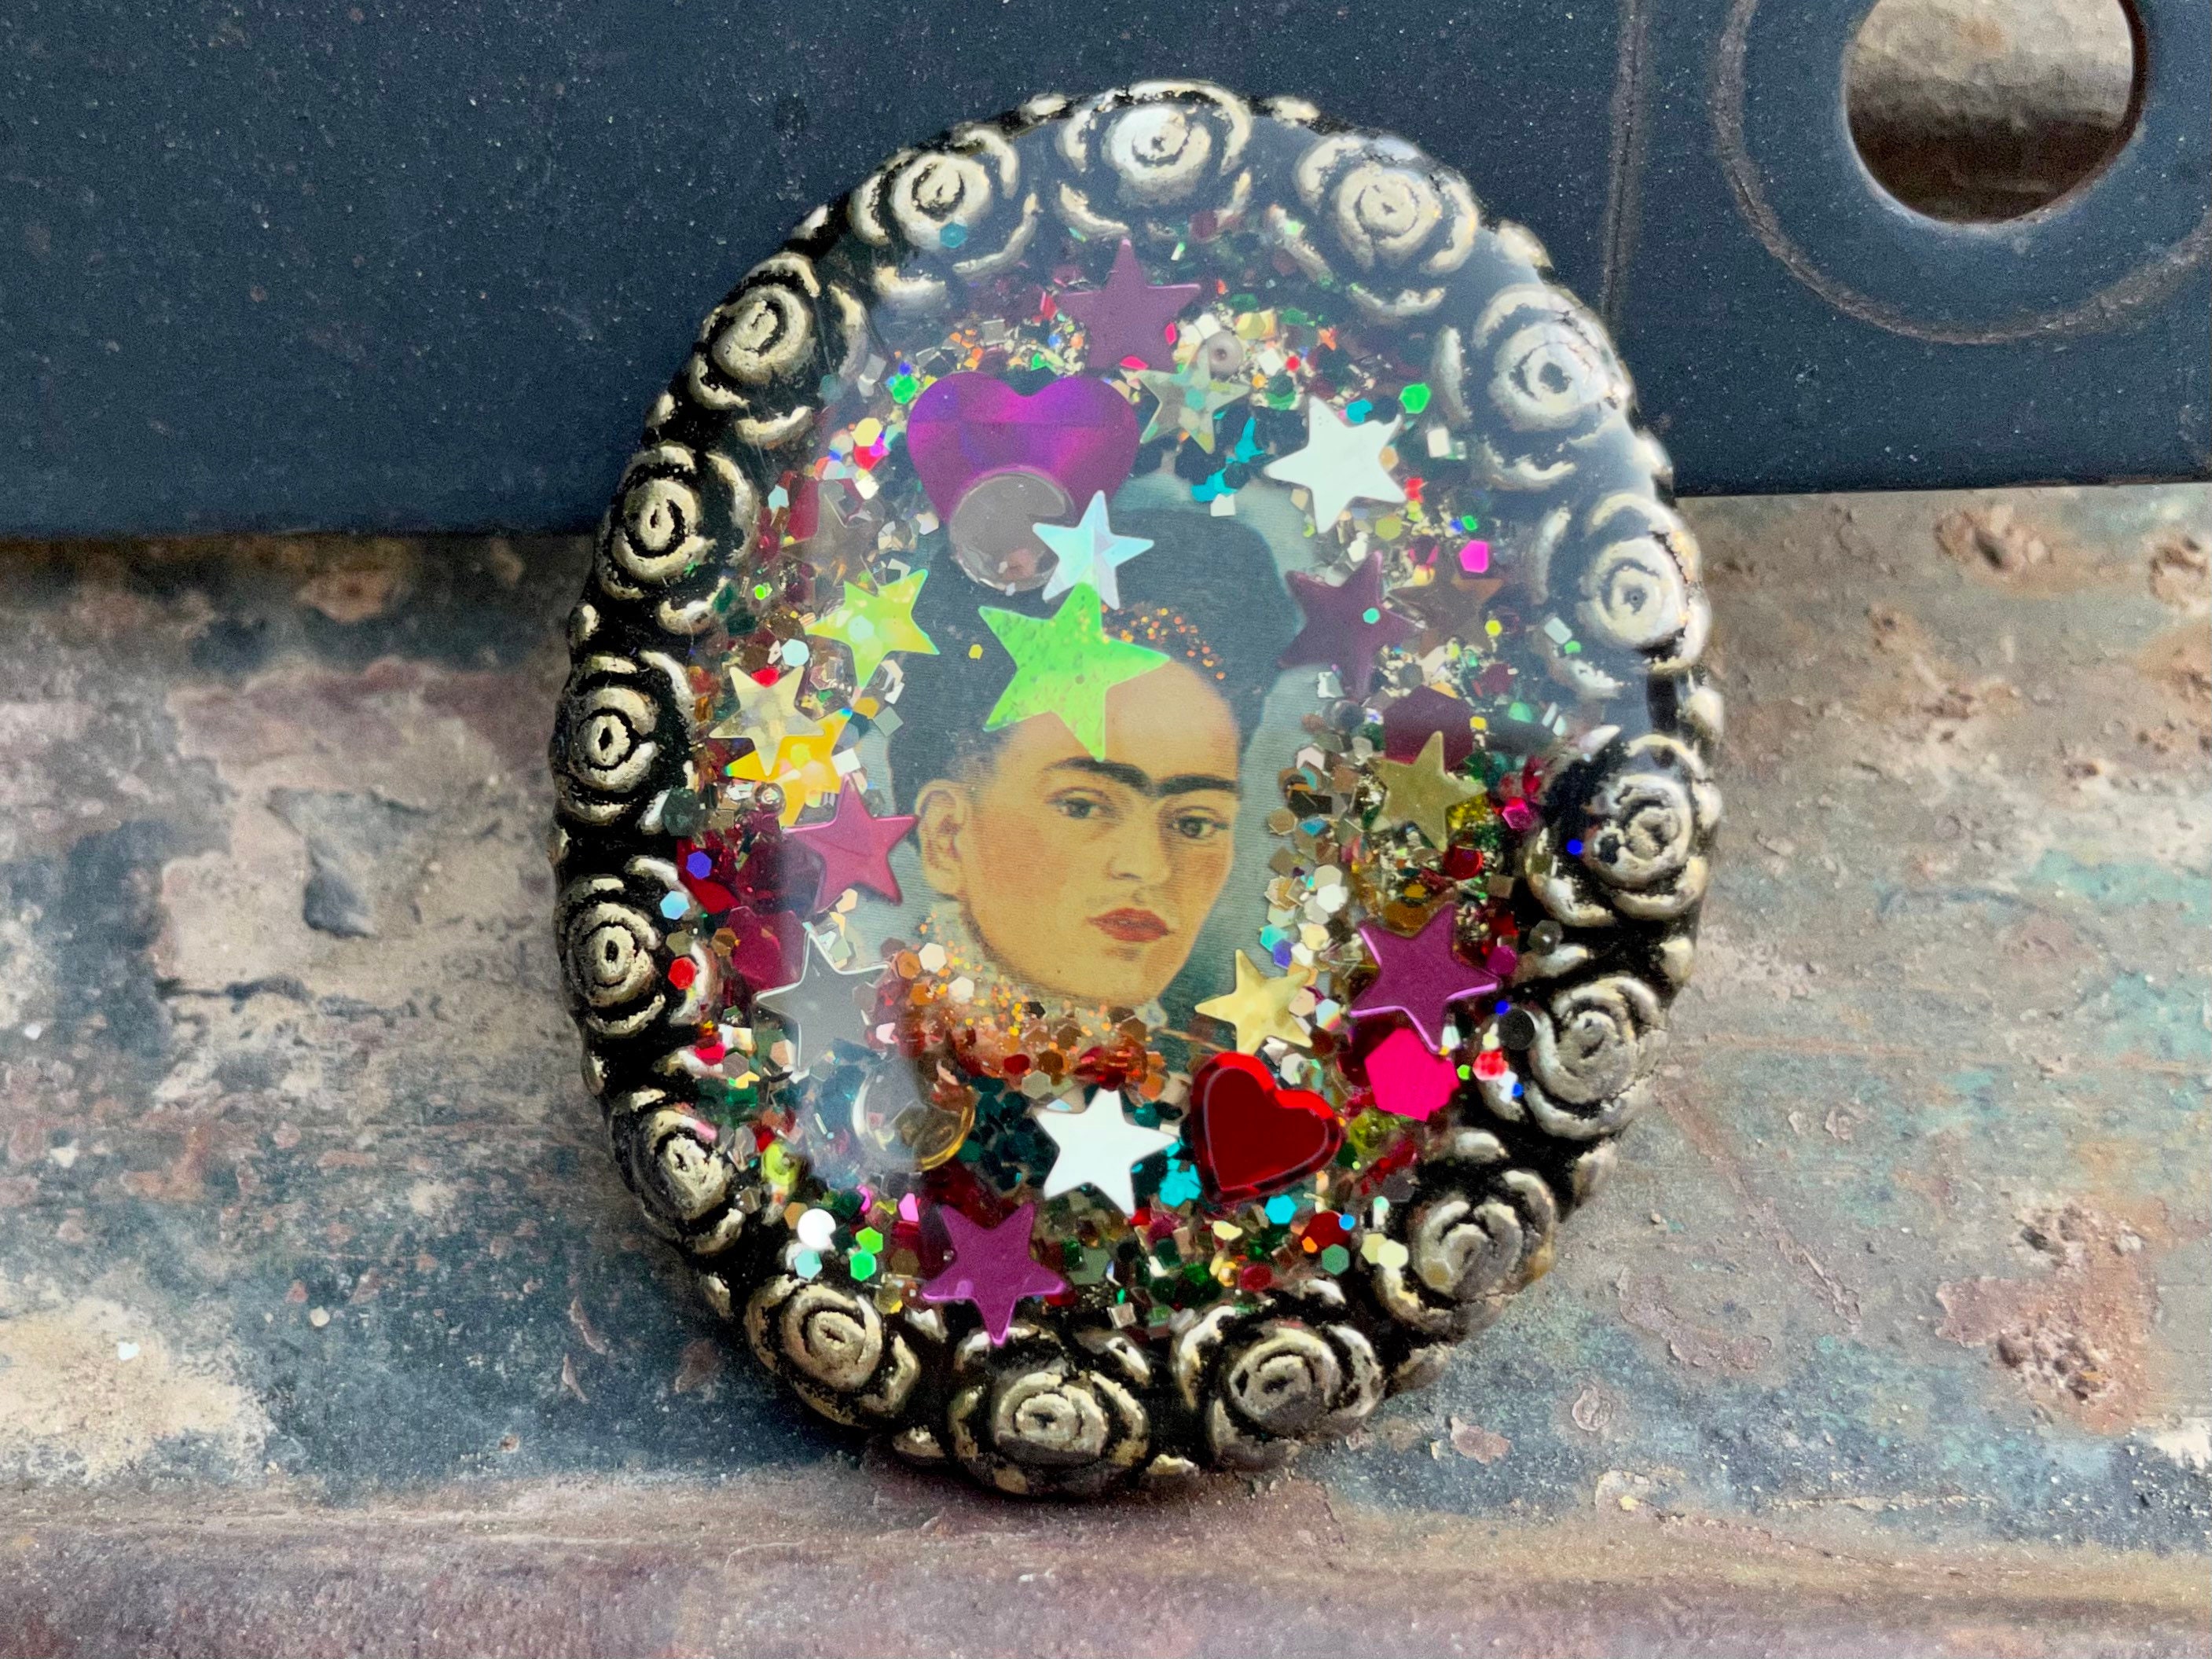 Vintage Upcycled 1950s Brooch Pin with Resin Covered Image of Frida ...